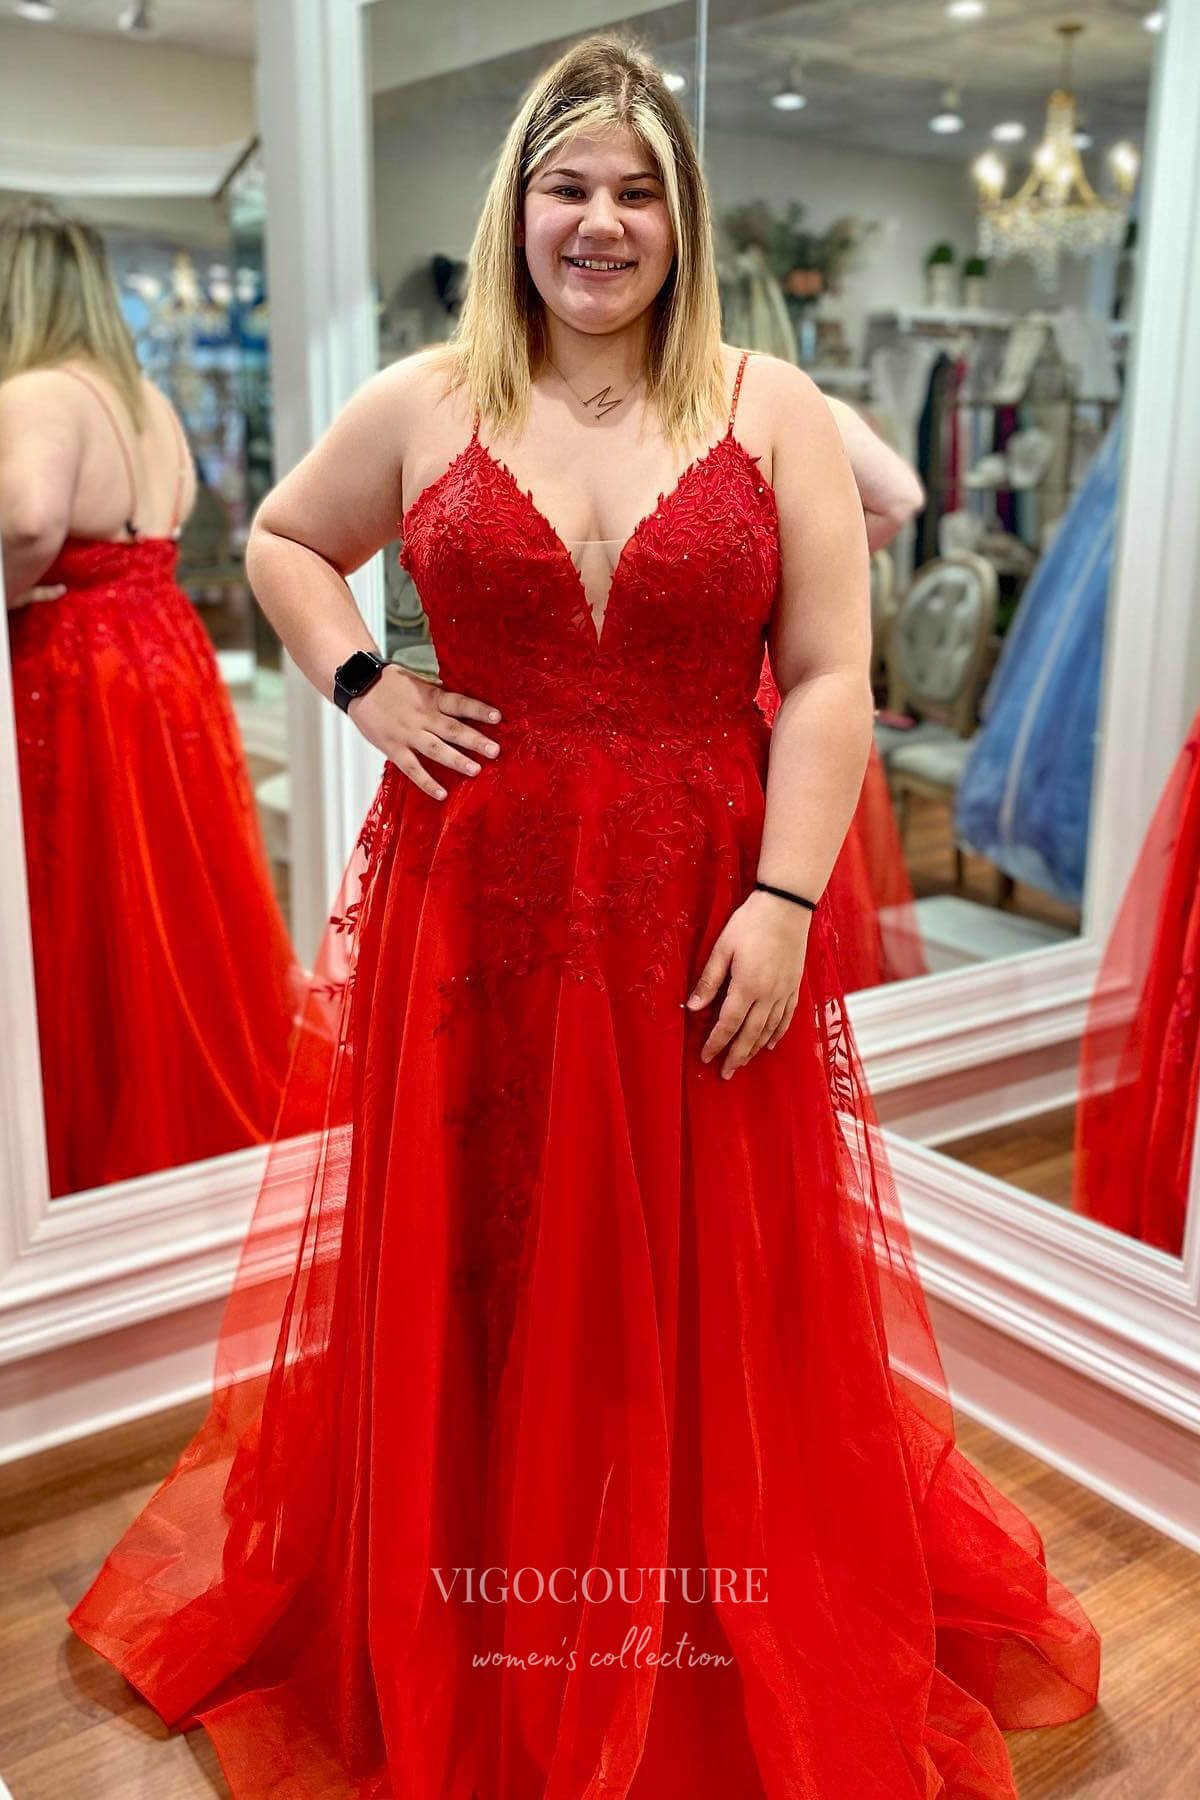 Stunning Red Lace Applique Plunging V-Neck Prom Dress with Spaghetti Strap 22190-Prom Dresses-vigocouture-Red-Custom Size-vigocouture